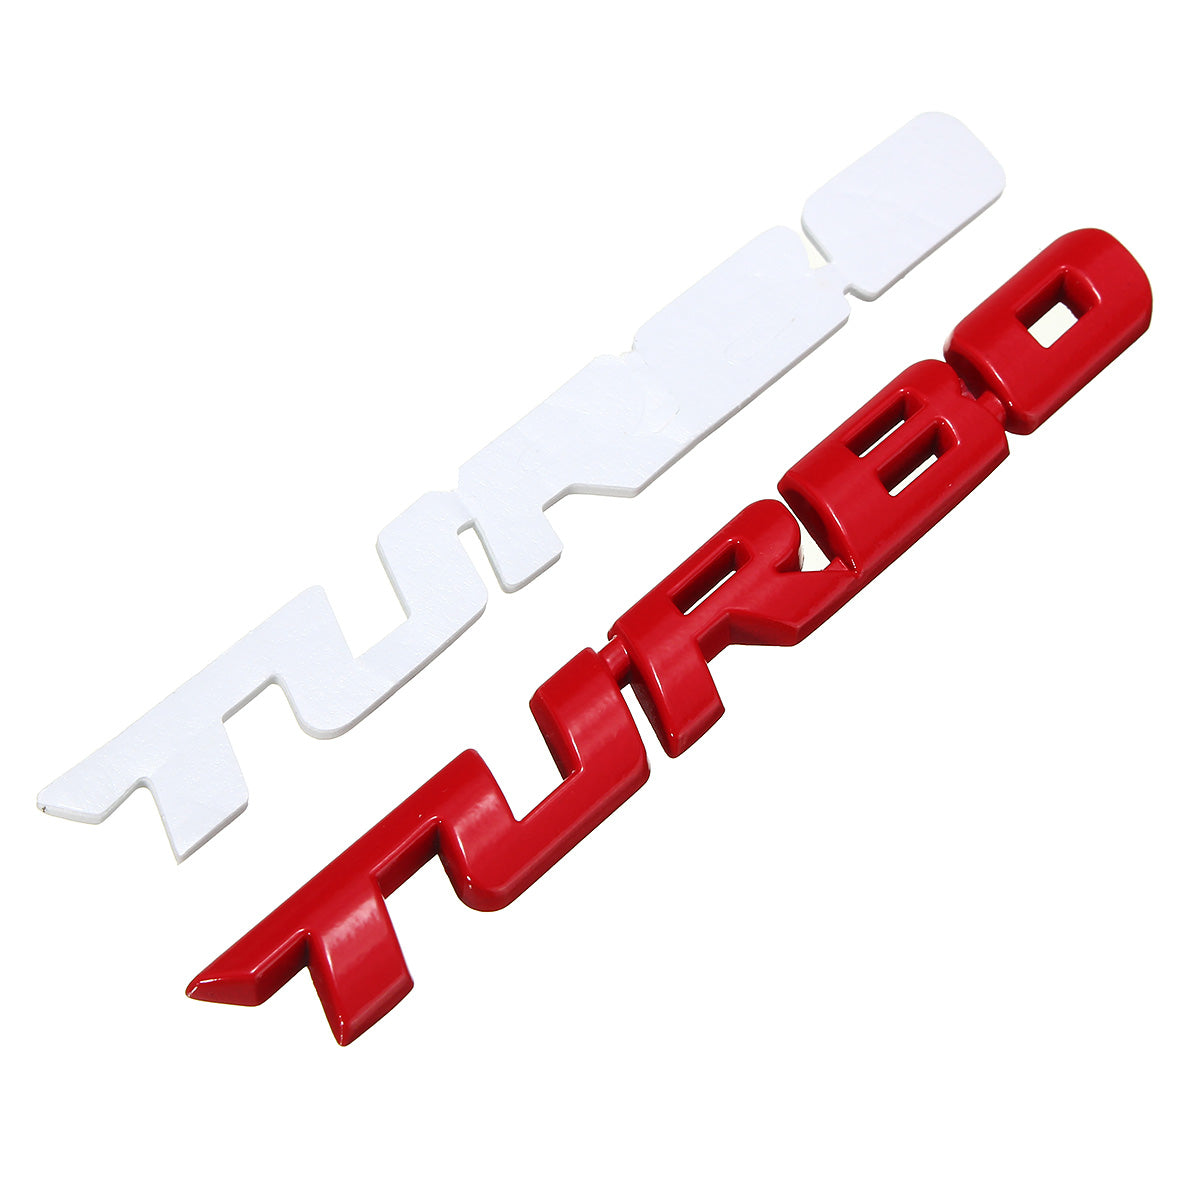 Firebrick Turbo 3D Metal Car Decals Lettering Badge Sticker for Auto Body Rear Tailgate